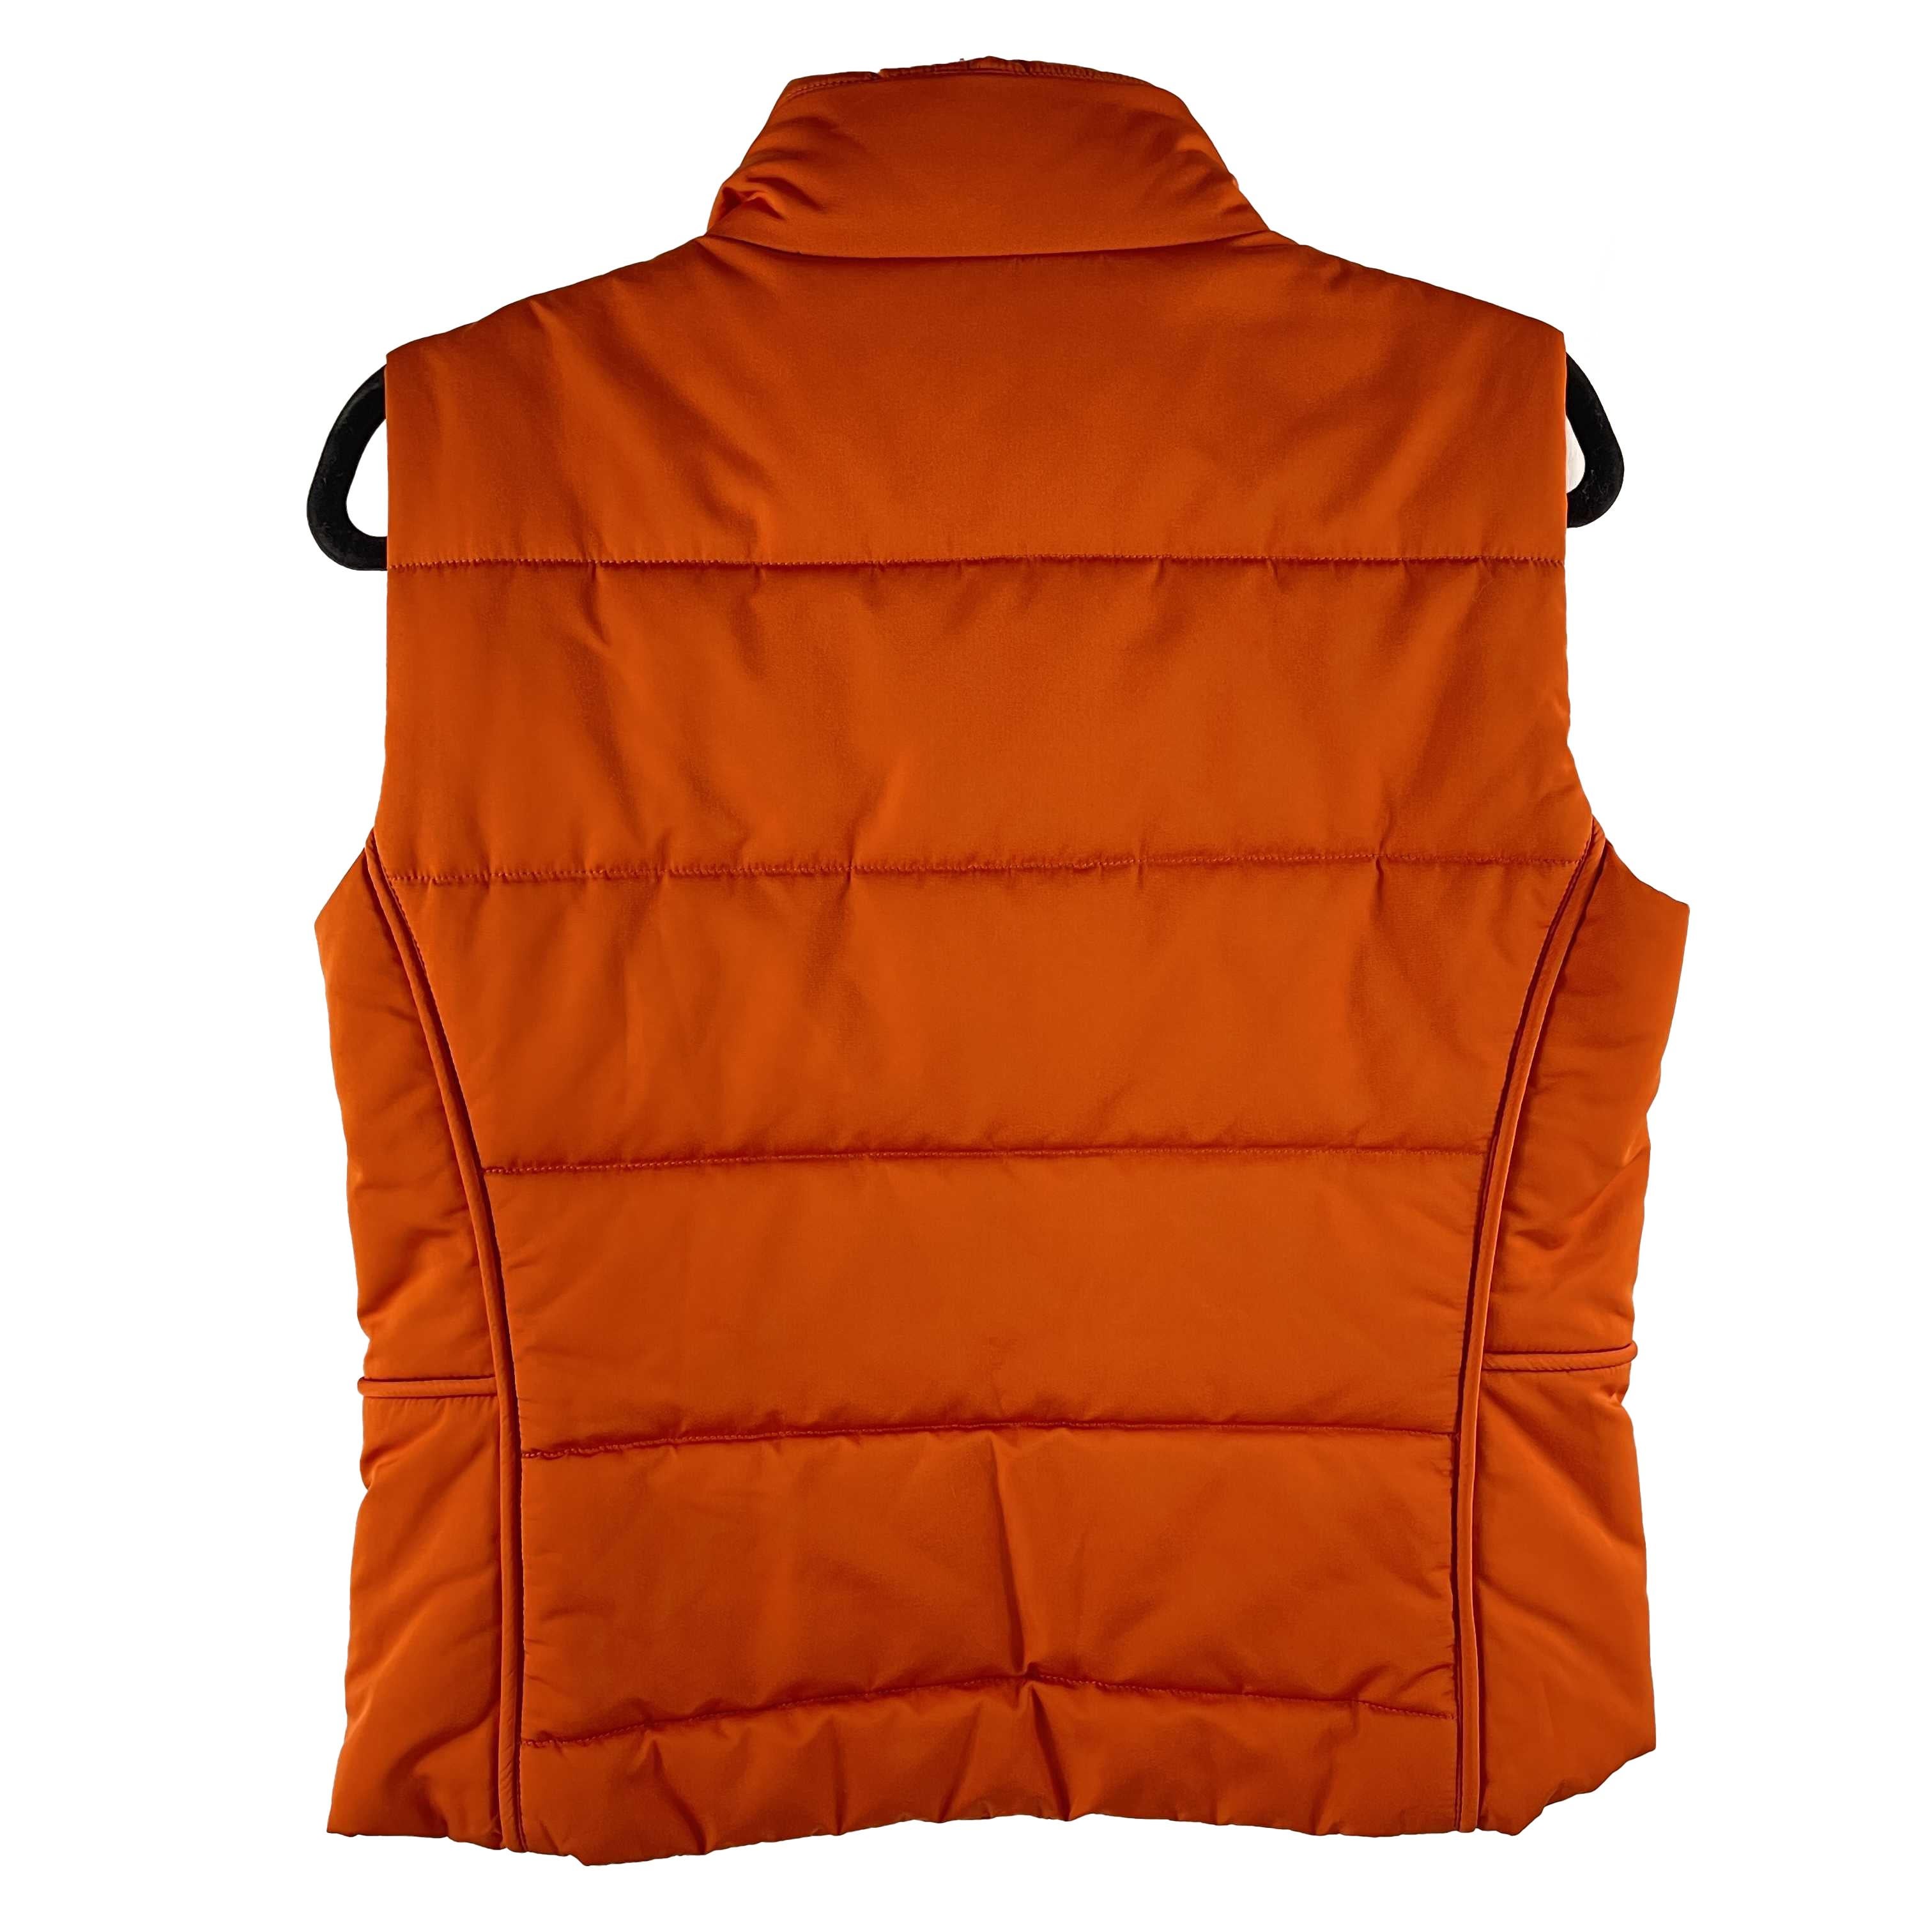 Hermès - Excellent - Zip Puffer Vest - Orange, Palladium Hardware - Jacket

Description

This Hermès puffer vest is crafted with an orange synthetic fabric along with palladium hardware.
It is designed with a striped stitch design on the front and